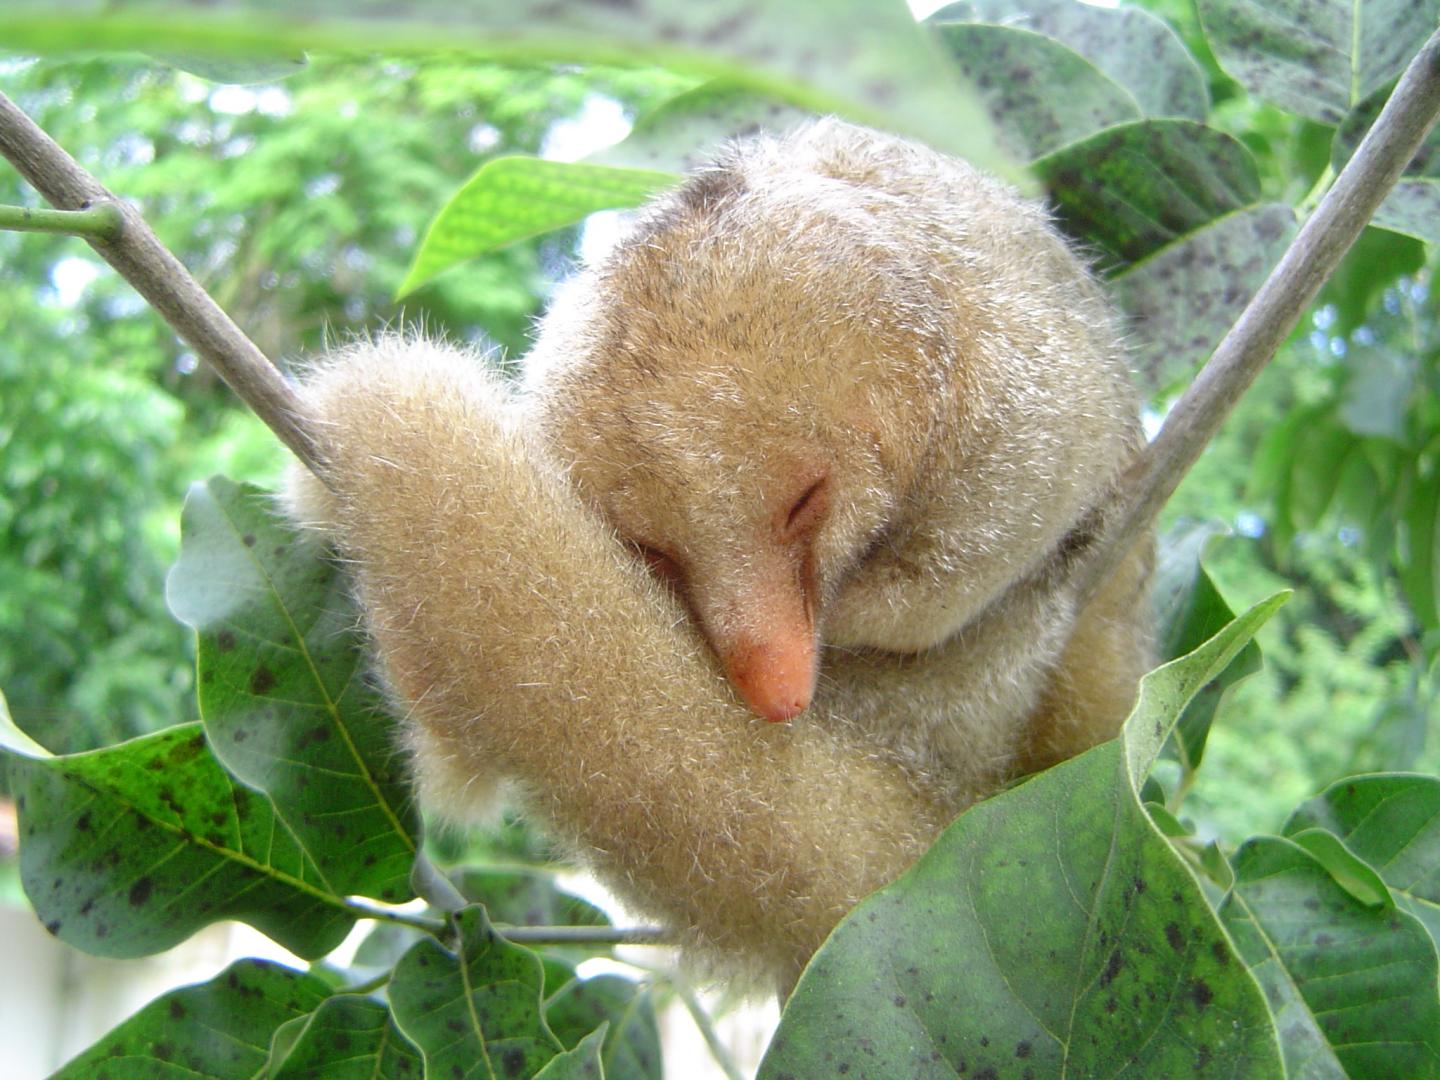 Research on the Silky Anteater II